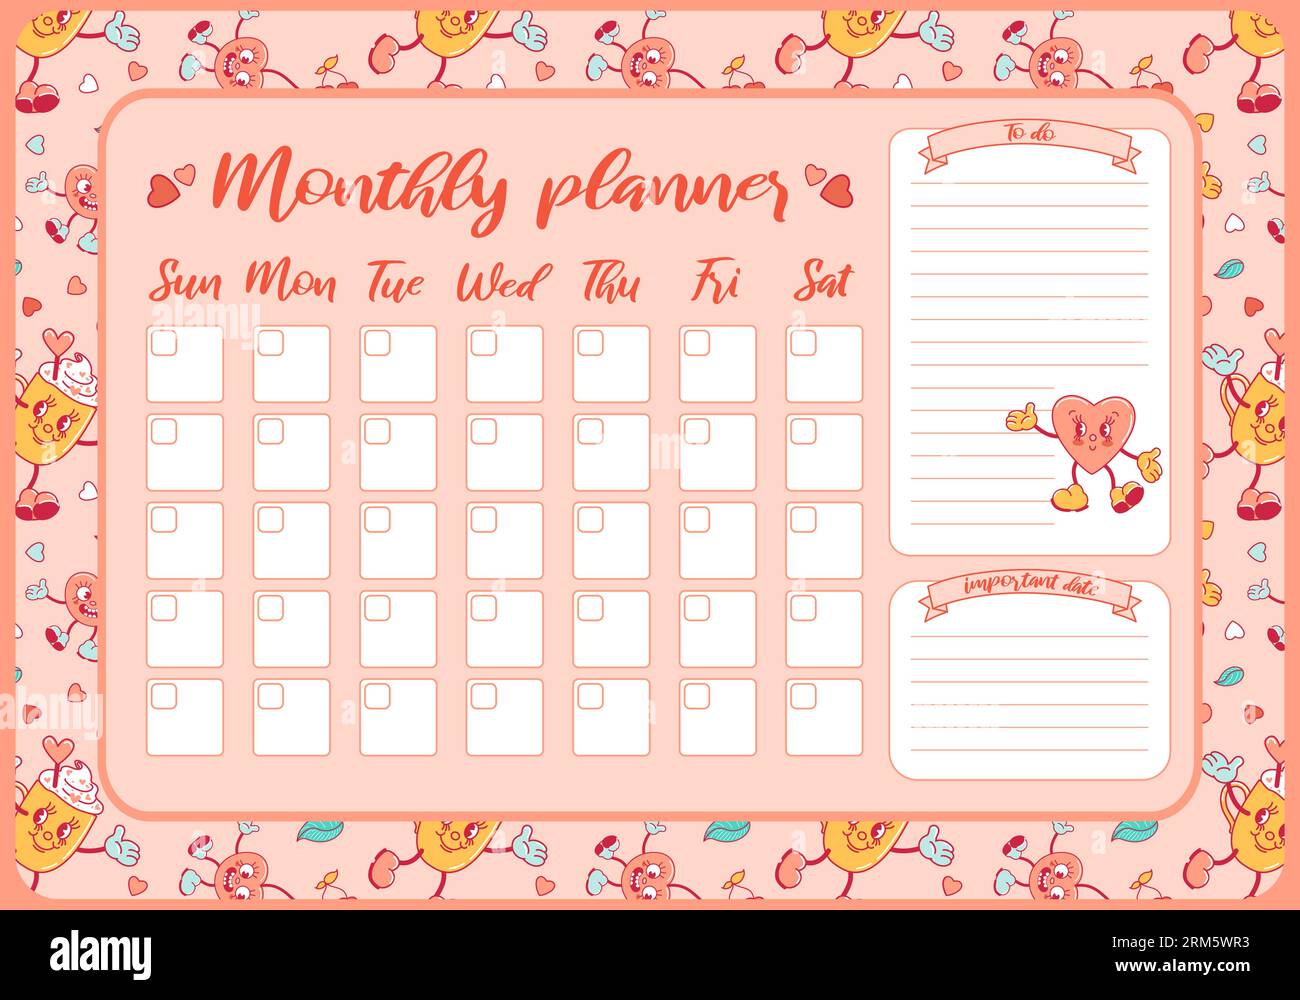 Monthly planner. Valentines Day, cherries, coffee mug, heart. Trendy old retro cartoon style. To do list, template design, important dates. Schedule f Stock Vector